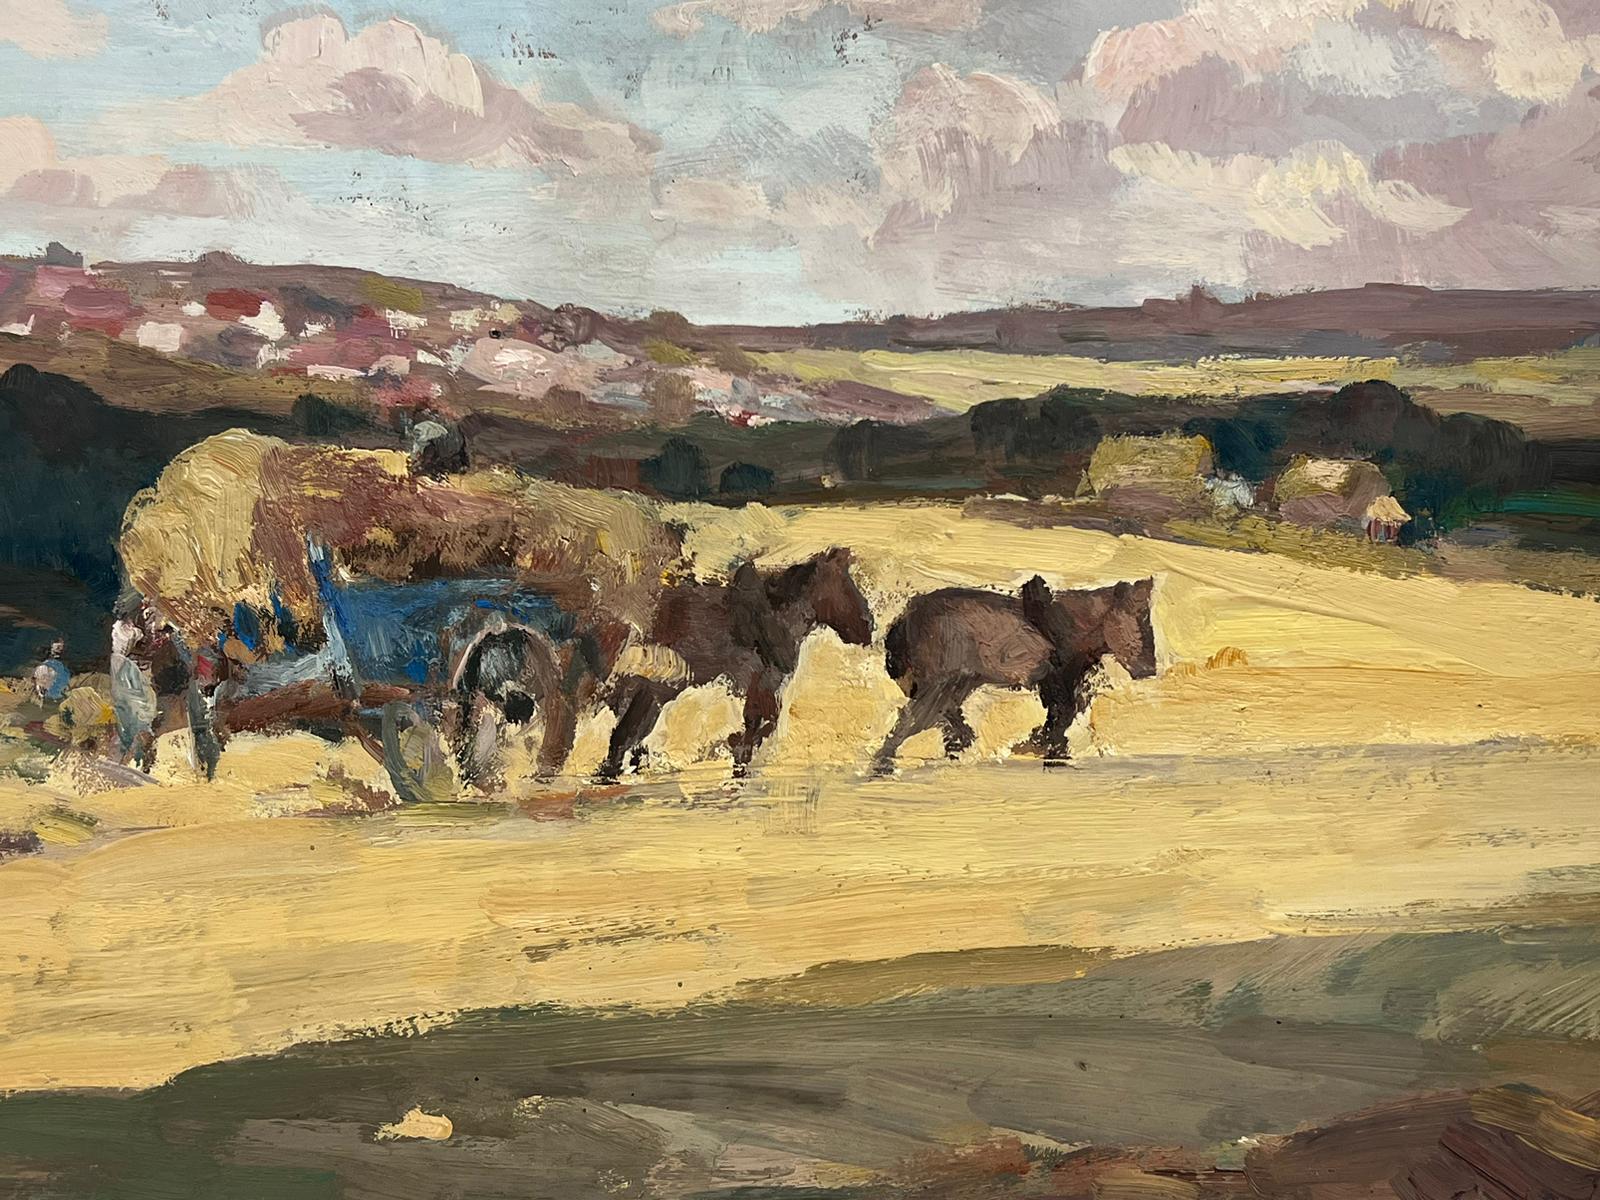 Artist/ School: Leon Hatot (French 1883-1953)

Title: Impressionist oil painting 

Medium: signed  oil painting on thick paper, stuck on board unframed
dated 1961

Size: painting: 12 x 20 inches

Provenance: all the paintings we have for sale by